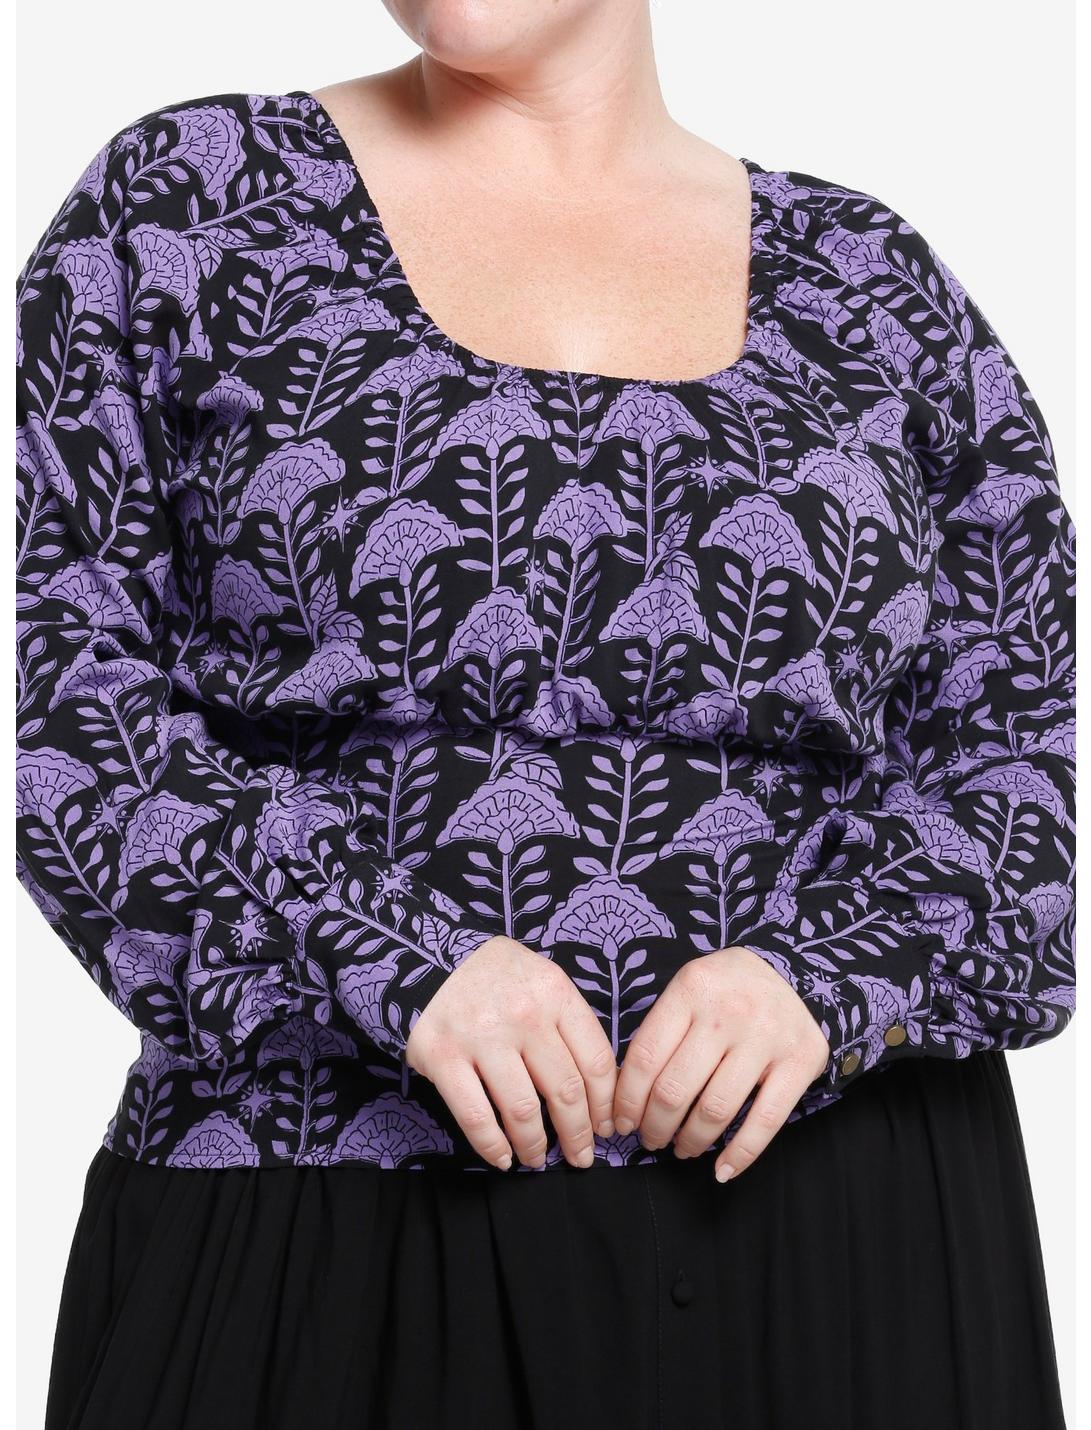 The Witcher Yennefer Flowers Long-Sleeve Top Plus Size, MULTI, hi-res